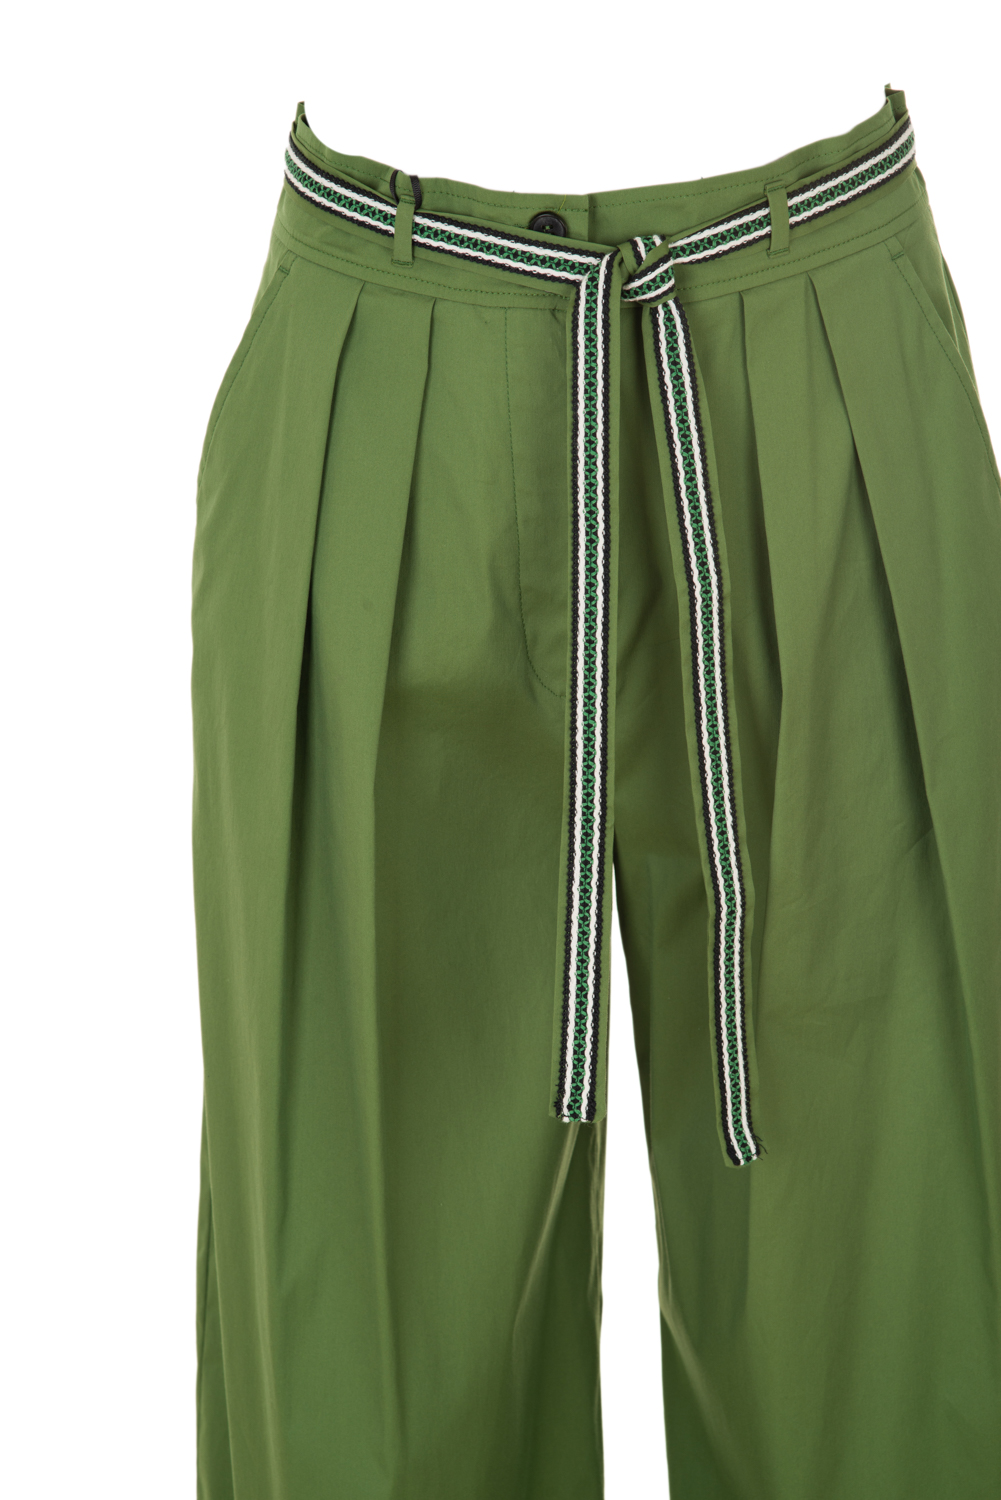 Wide Legged Trousers with Front Pleats and Macramé Tie Belt